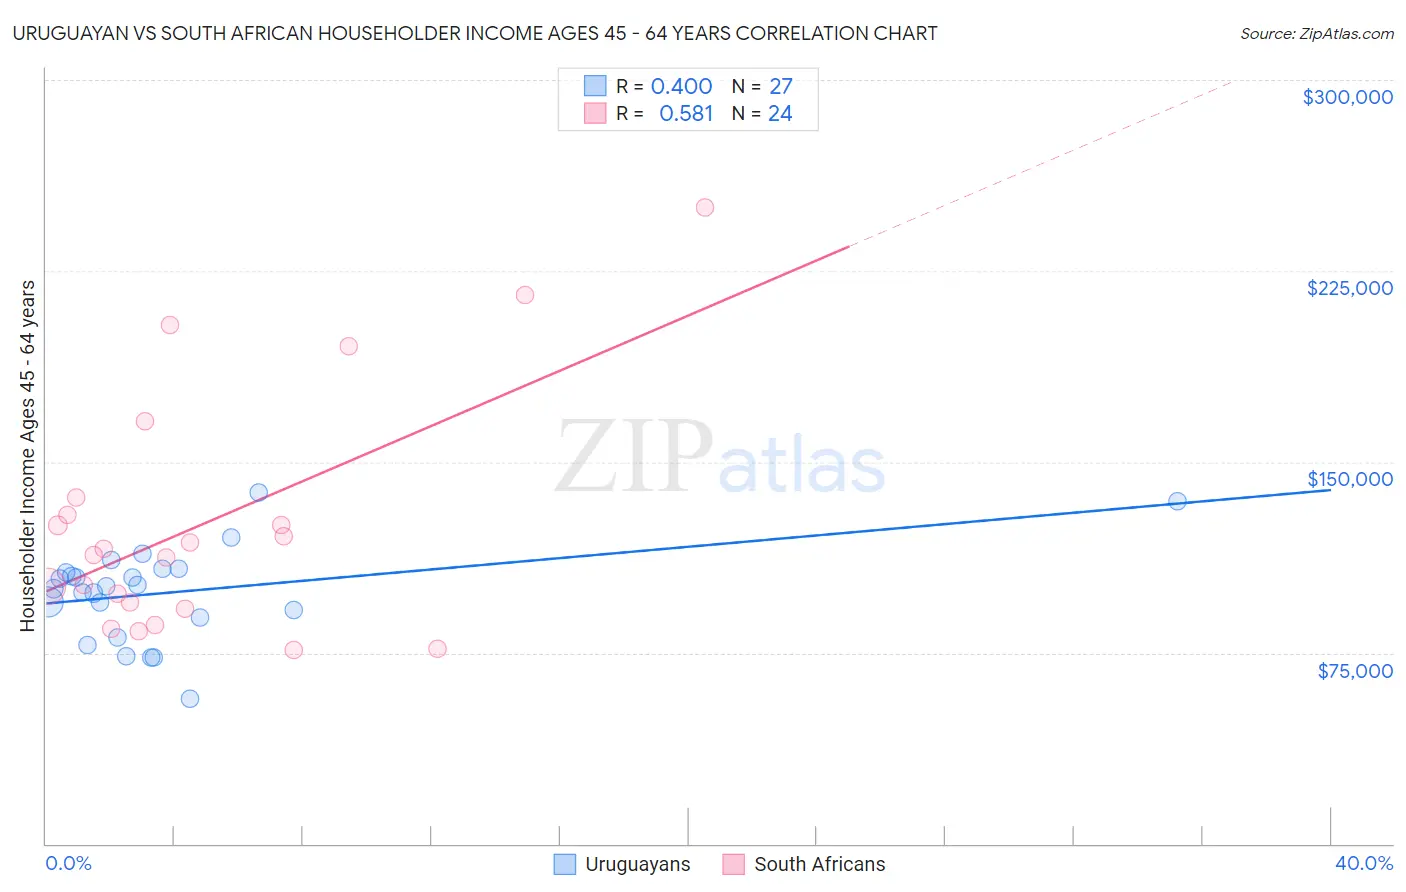 Uruguayan vs South African Householder Income Ages 45 - 64 years